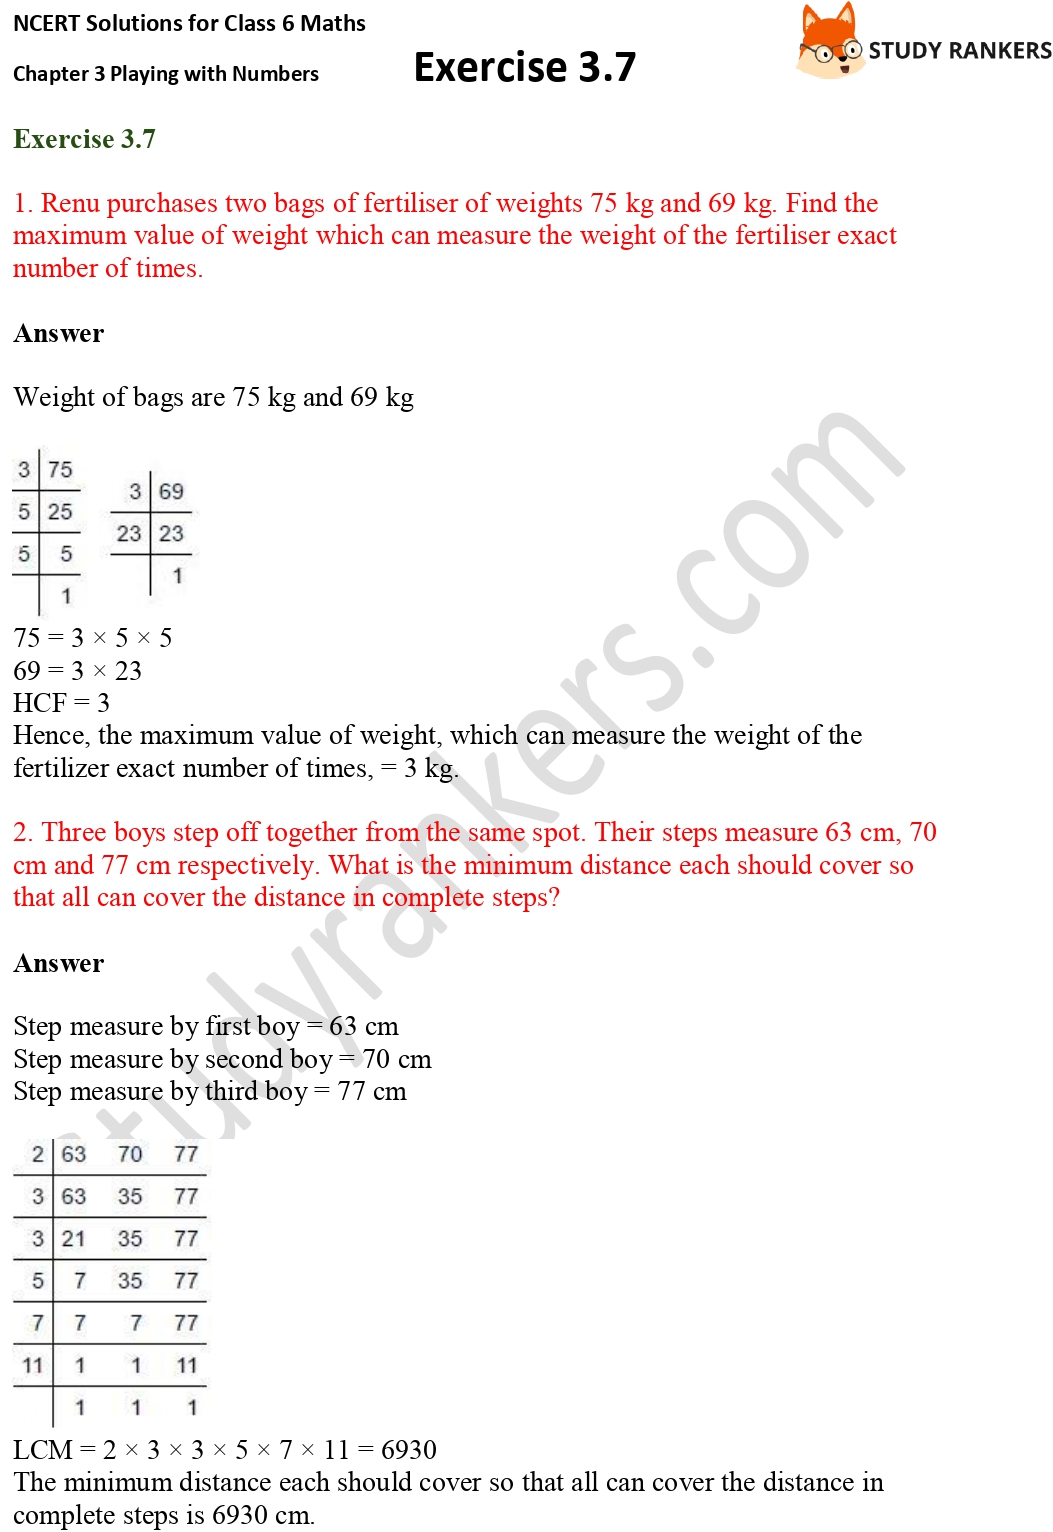 NCERT Solutions for Class 6 Maths Chapter 3 Playing with Numbers Exercise 3.7 Part 1